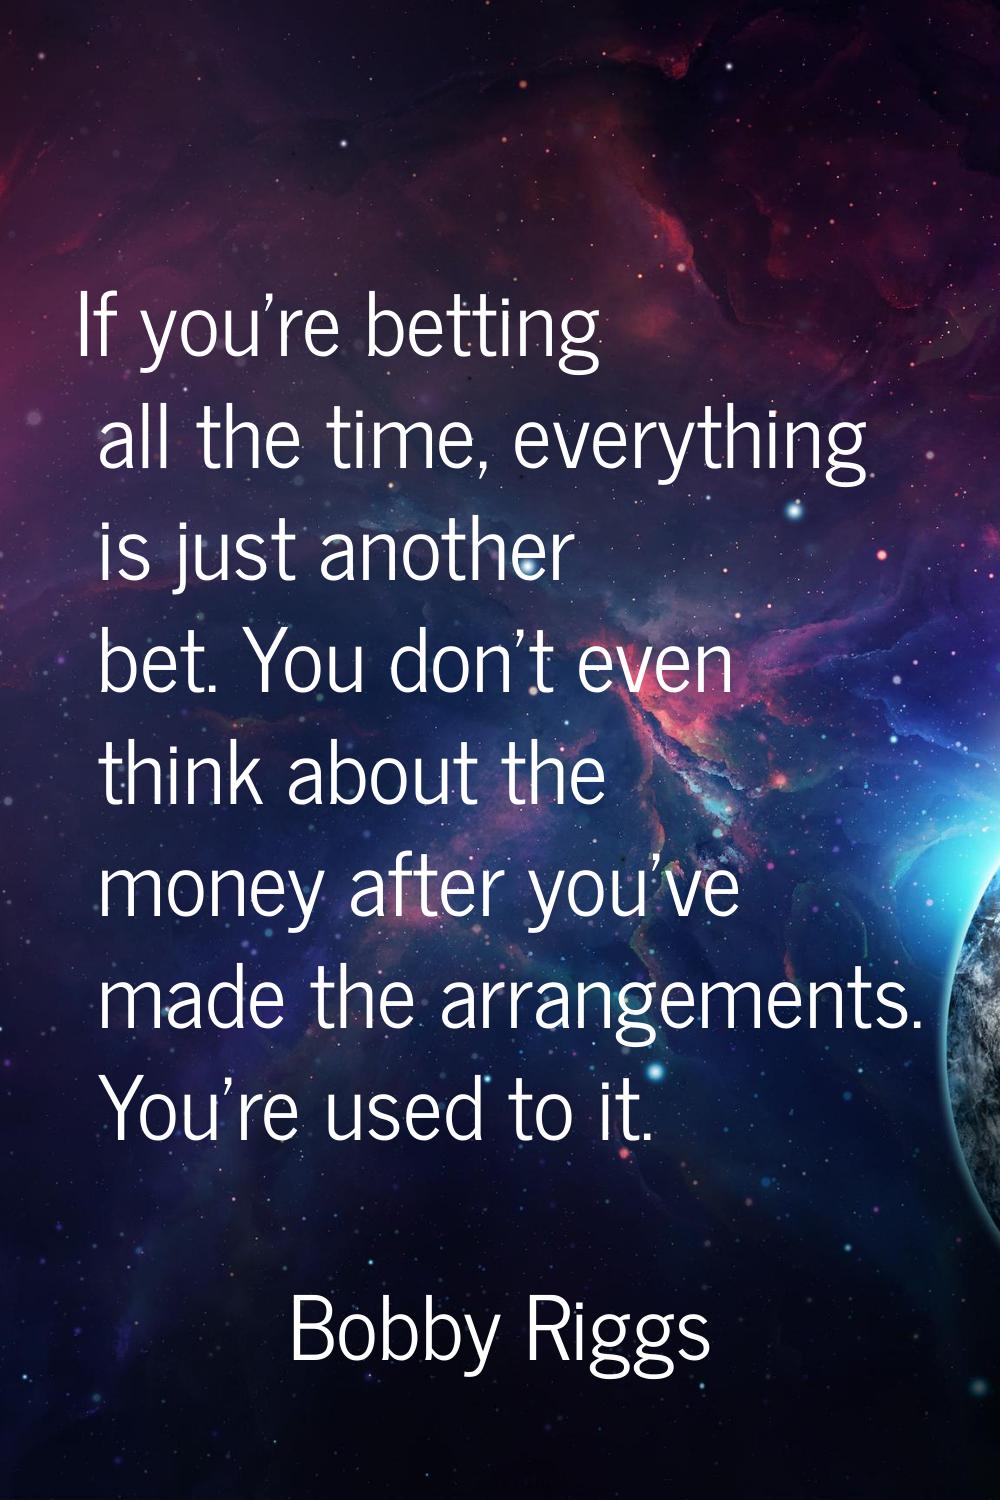 If you're betting all the time, everything is just another bet. You don't even think about the mone